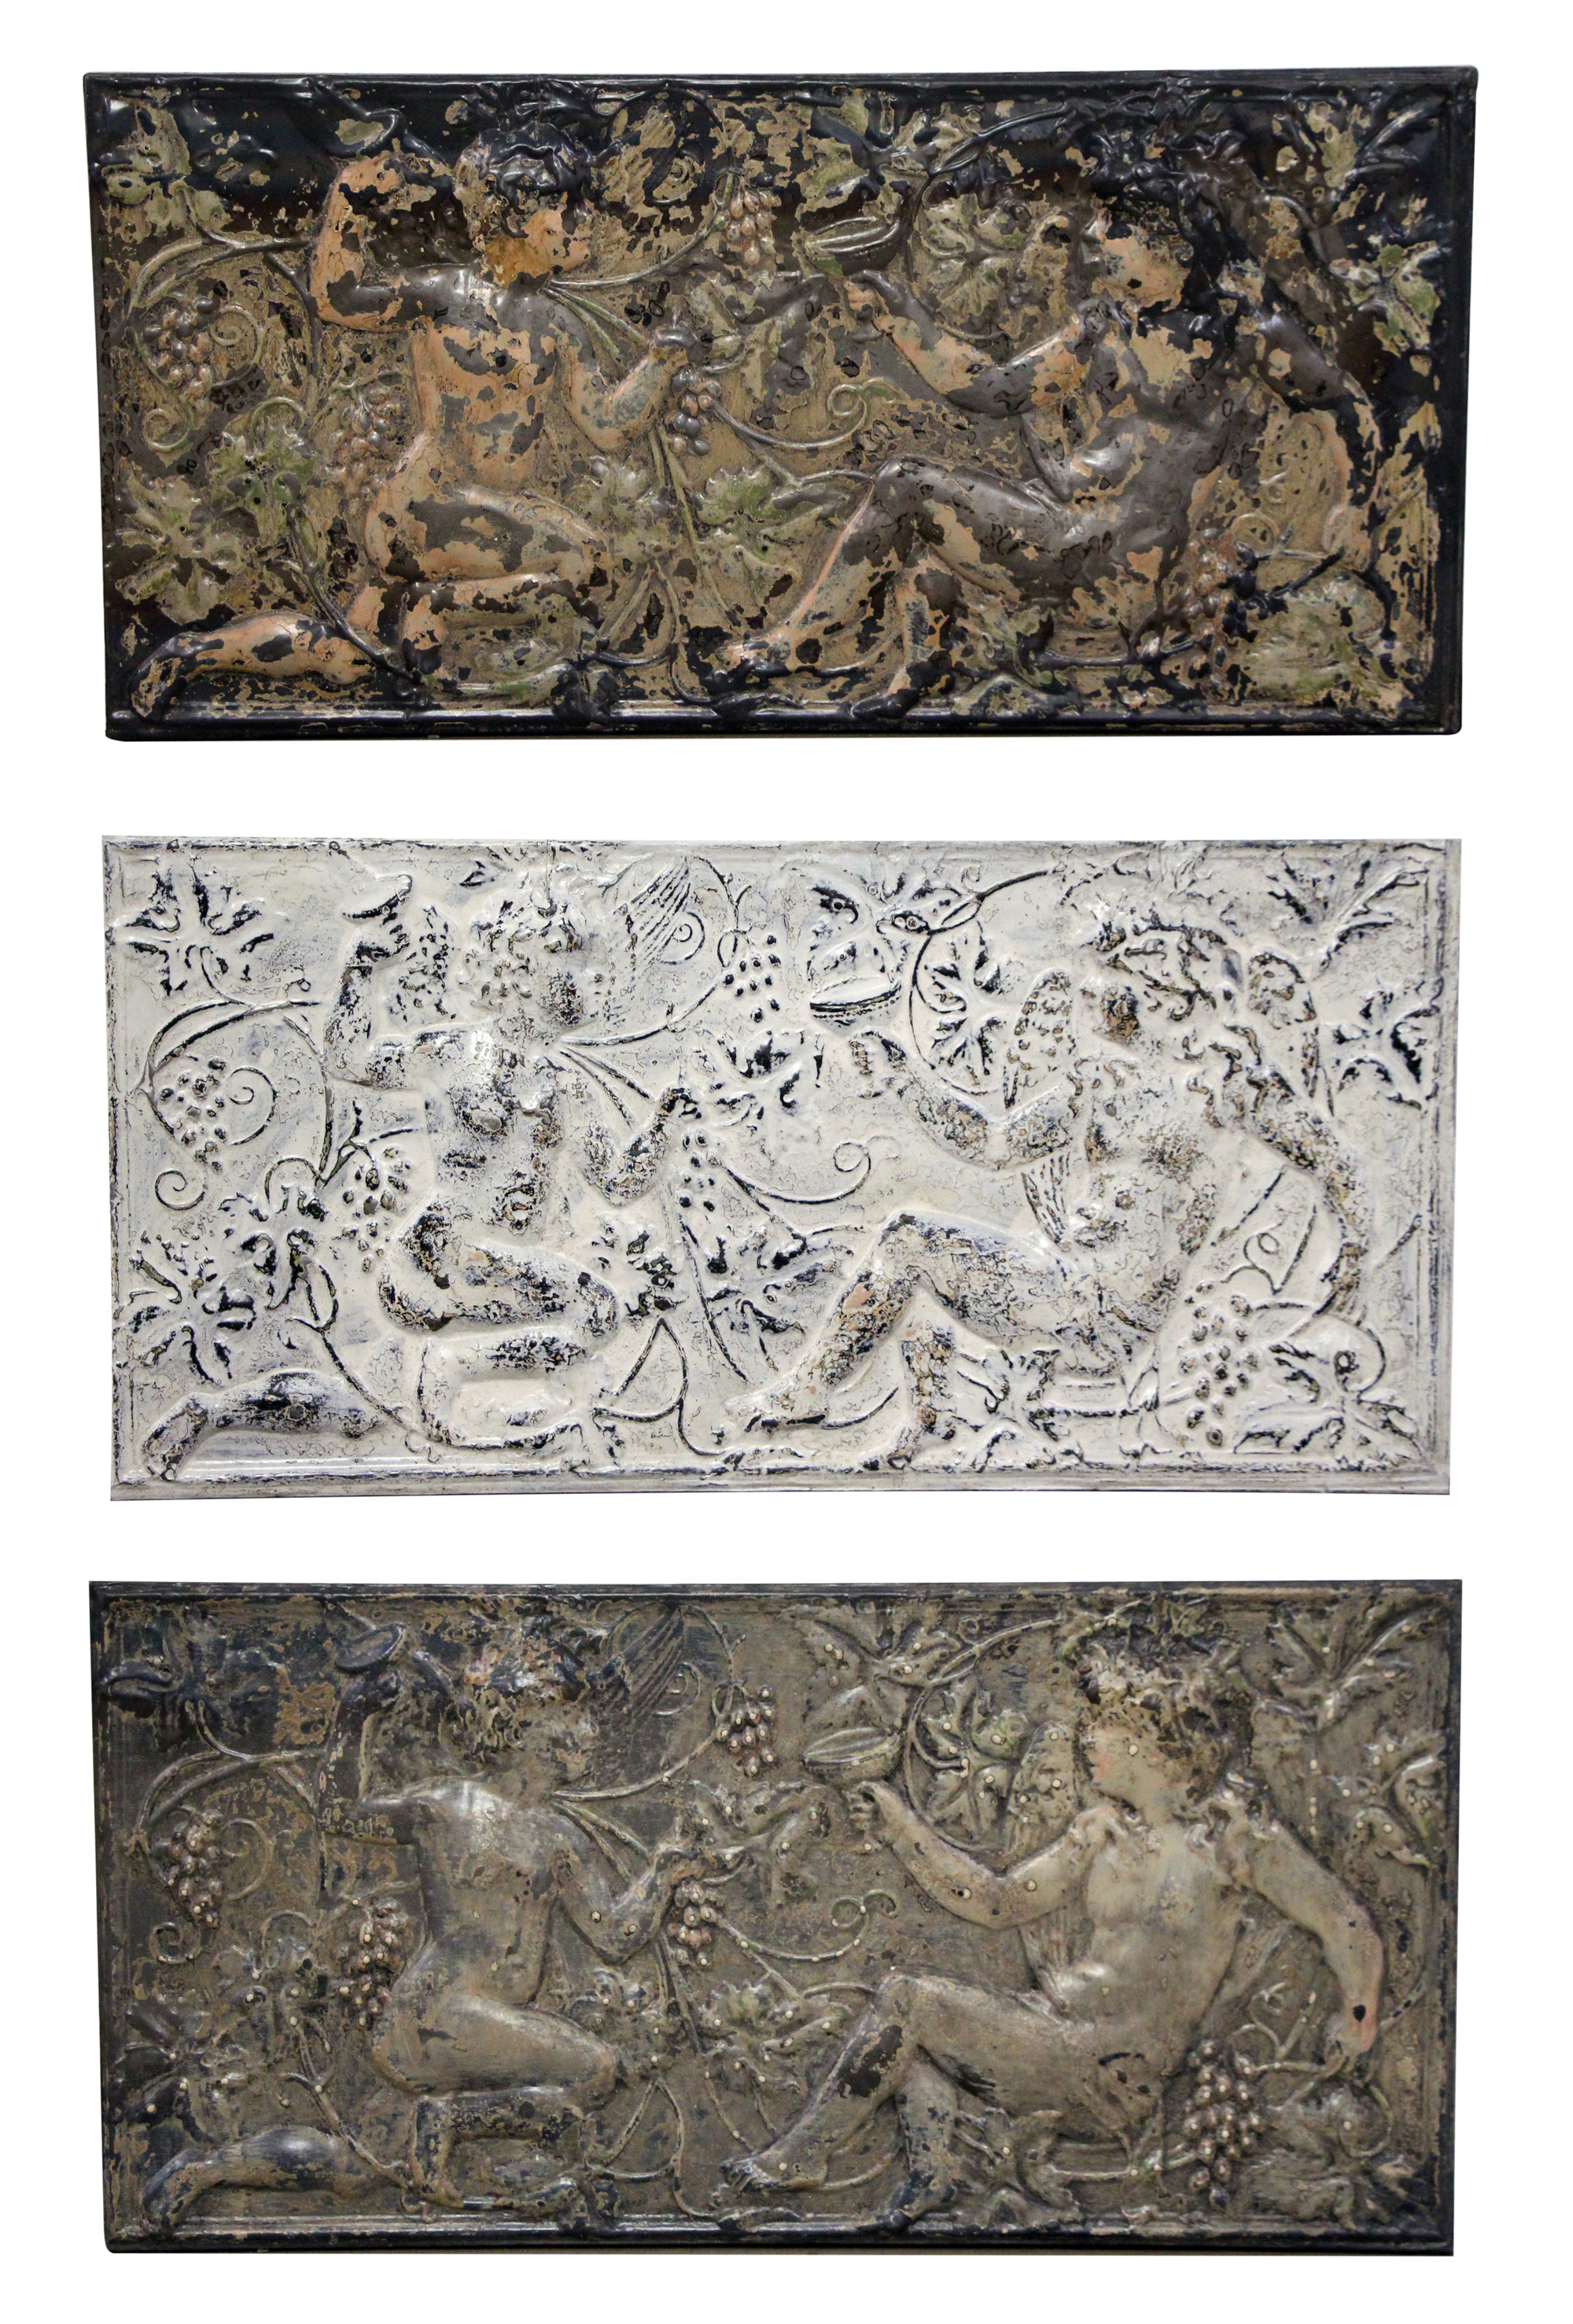 Here you see cherubic figural panels finished and ready for purchase